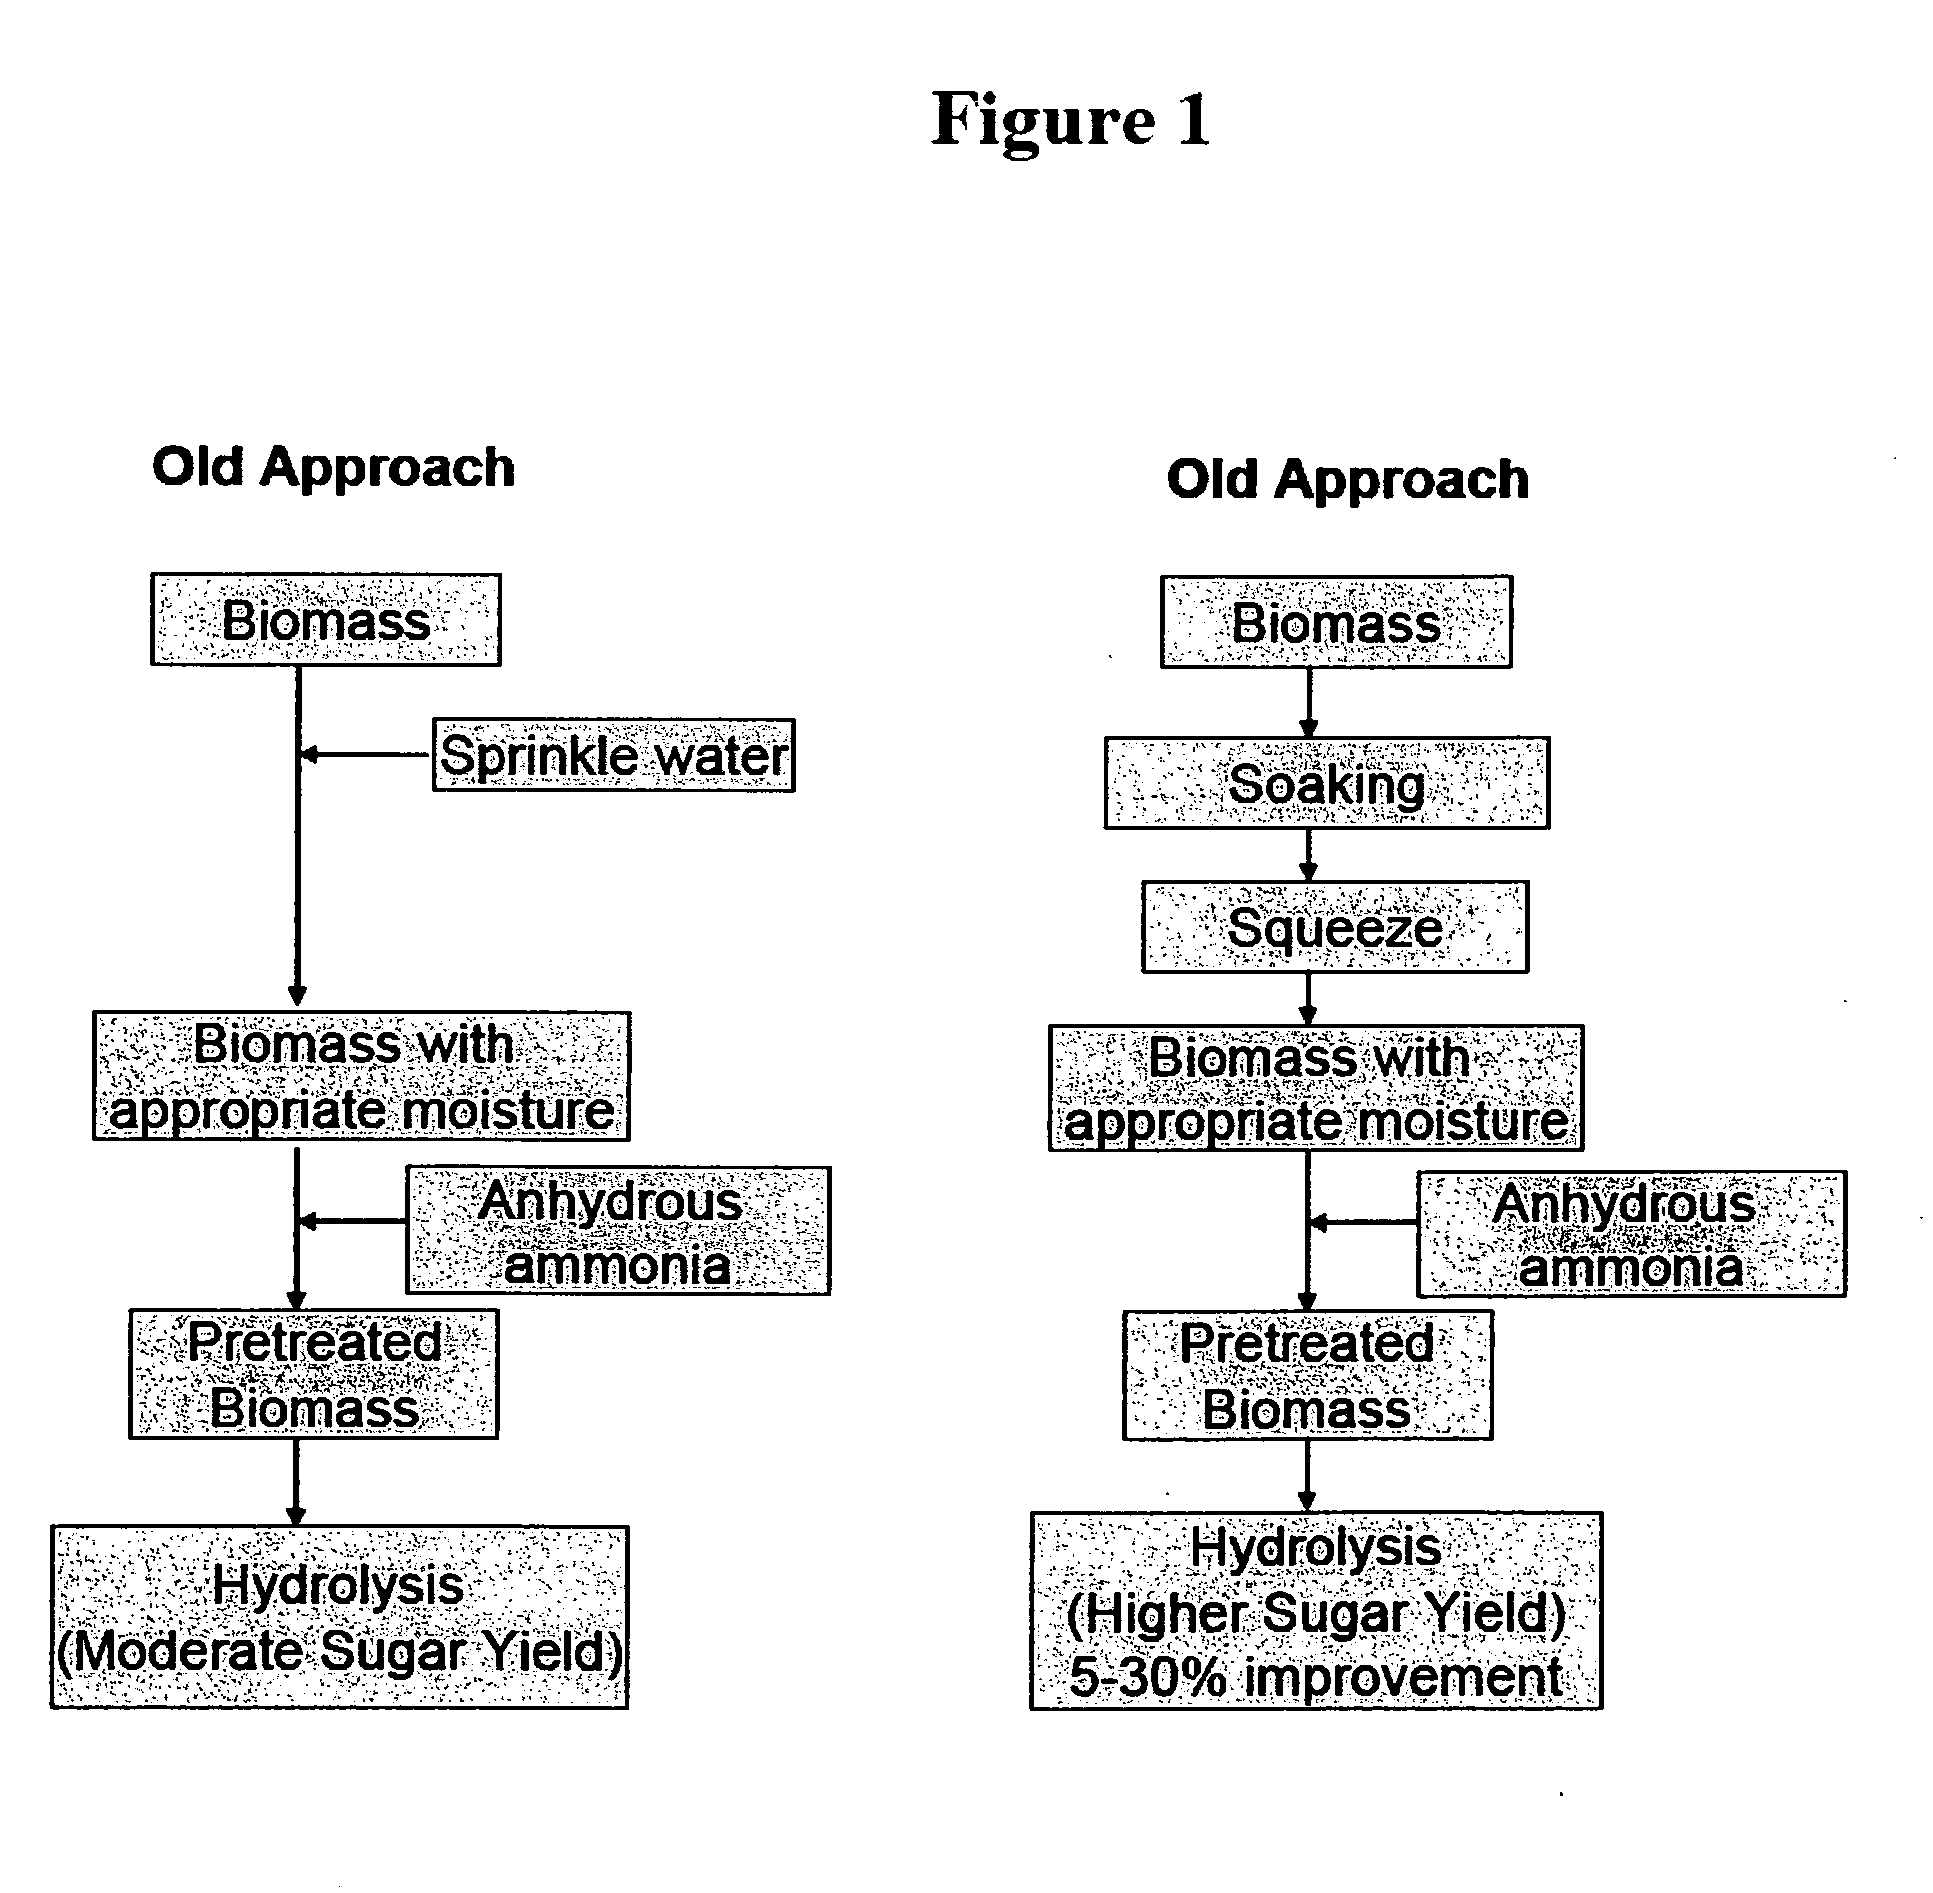 Process for producing sugars from cellulosic biomass